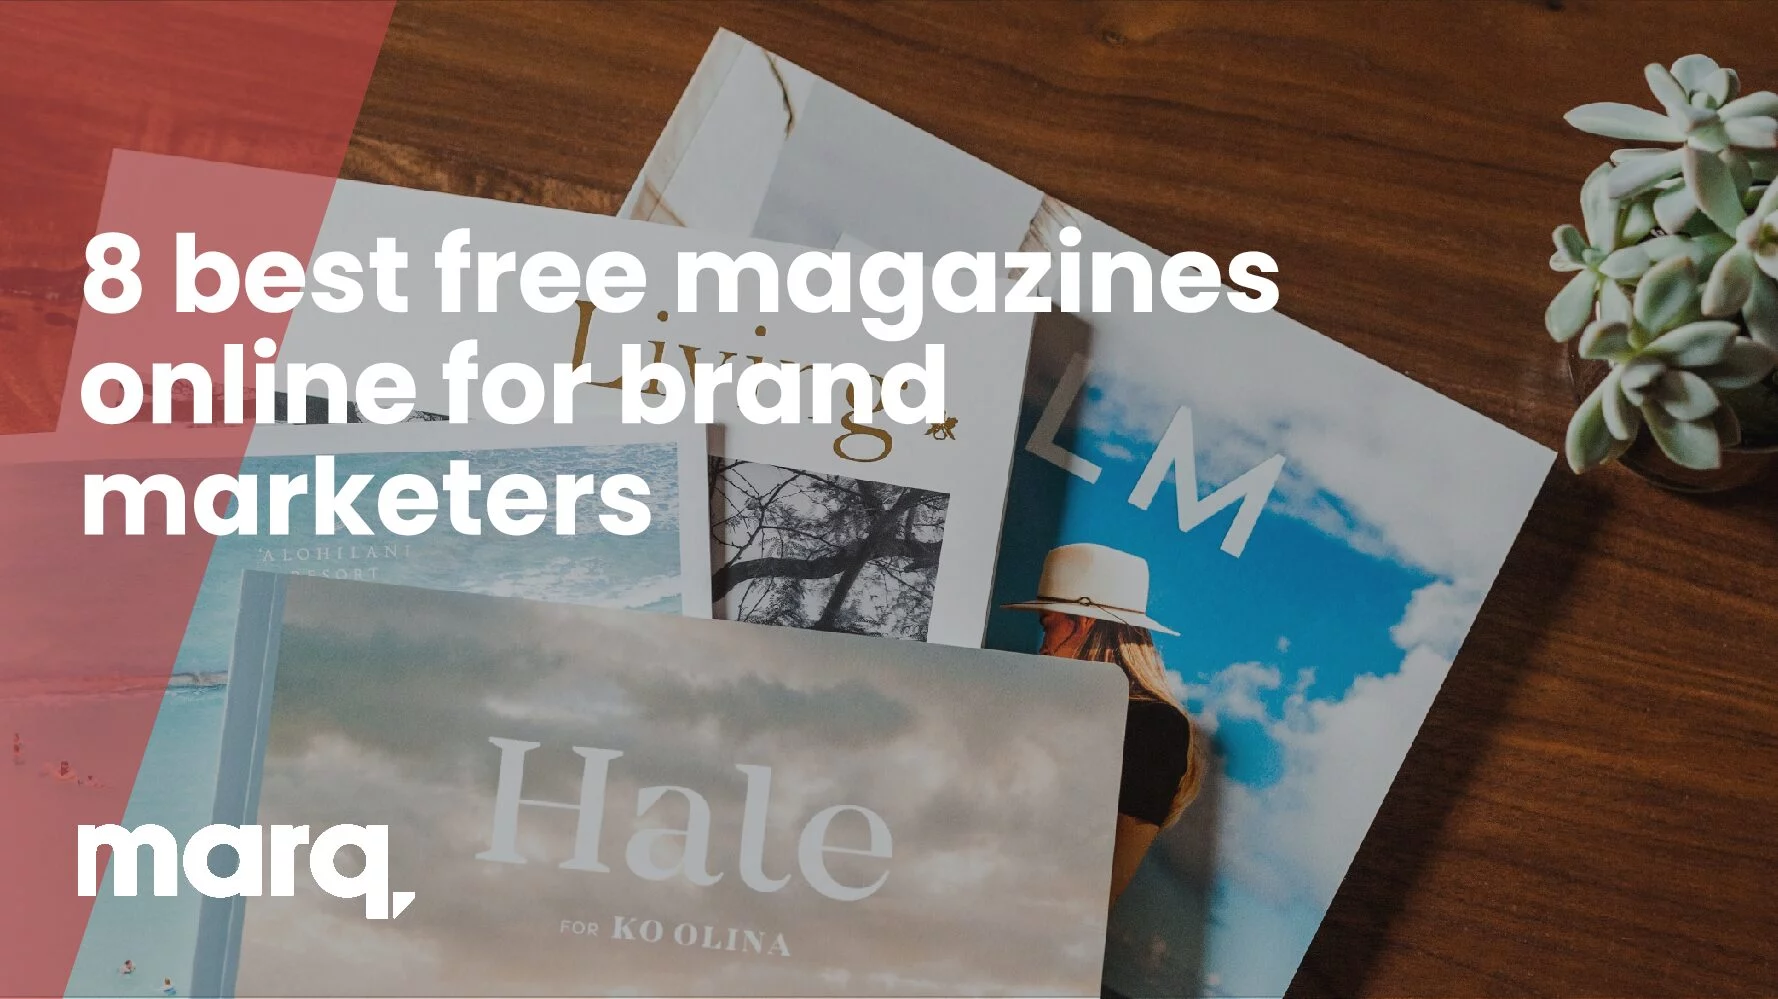 The 8 best free magazines online for brand marketers